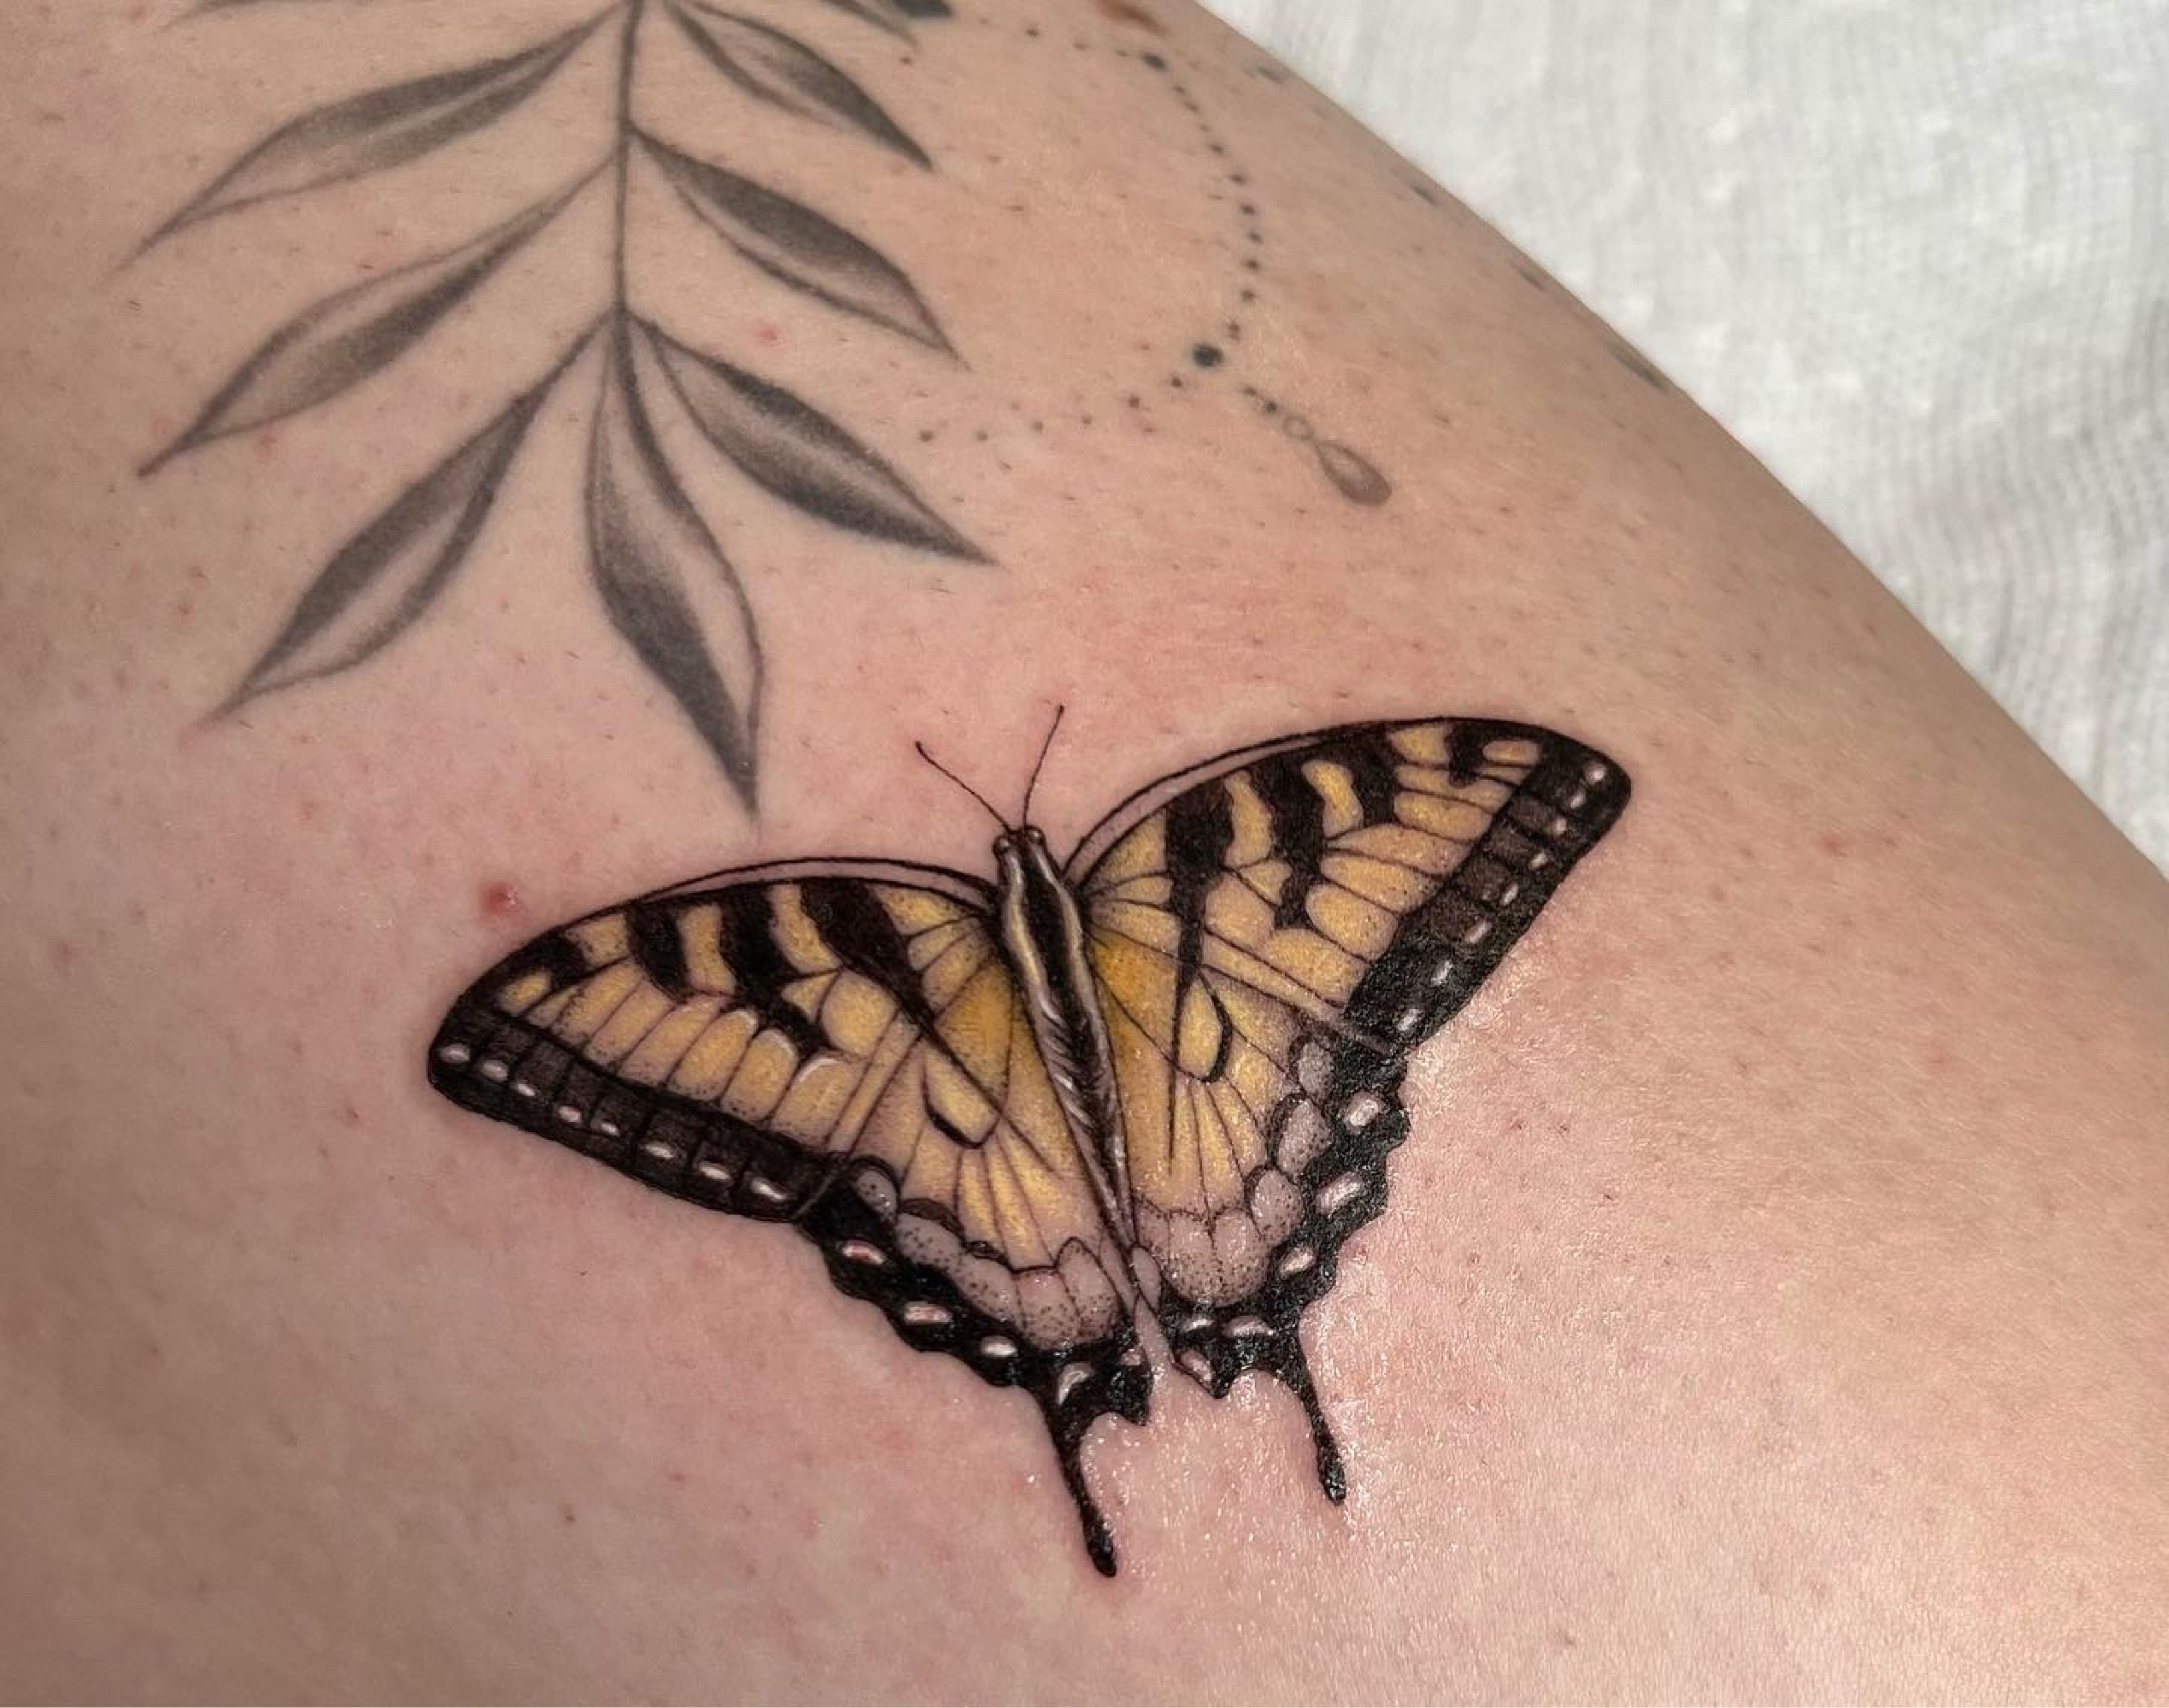 My Little Needle Tattoos  Tiger swallowtail butterfly created by vffoxx  Do you have a favorite butterfly tattoo tattoos blackandgreytattoo  bngtattoo butterfly butterflytattoo insecttattoo naturetattoo  minimaltattoo michigantattooers 